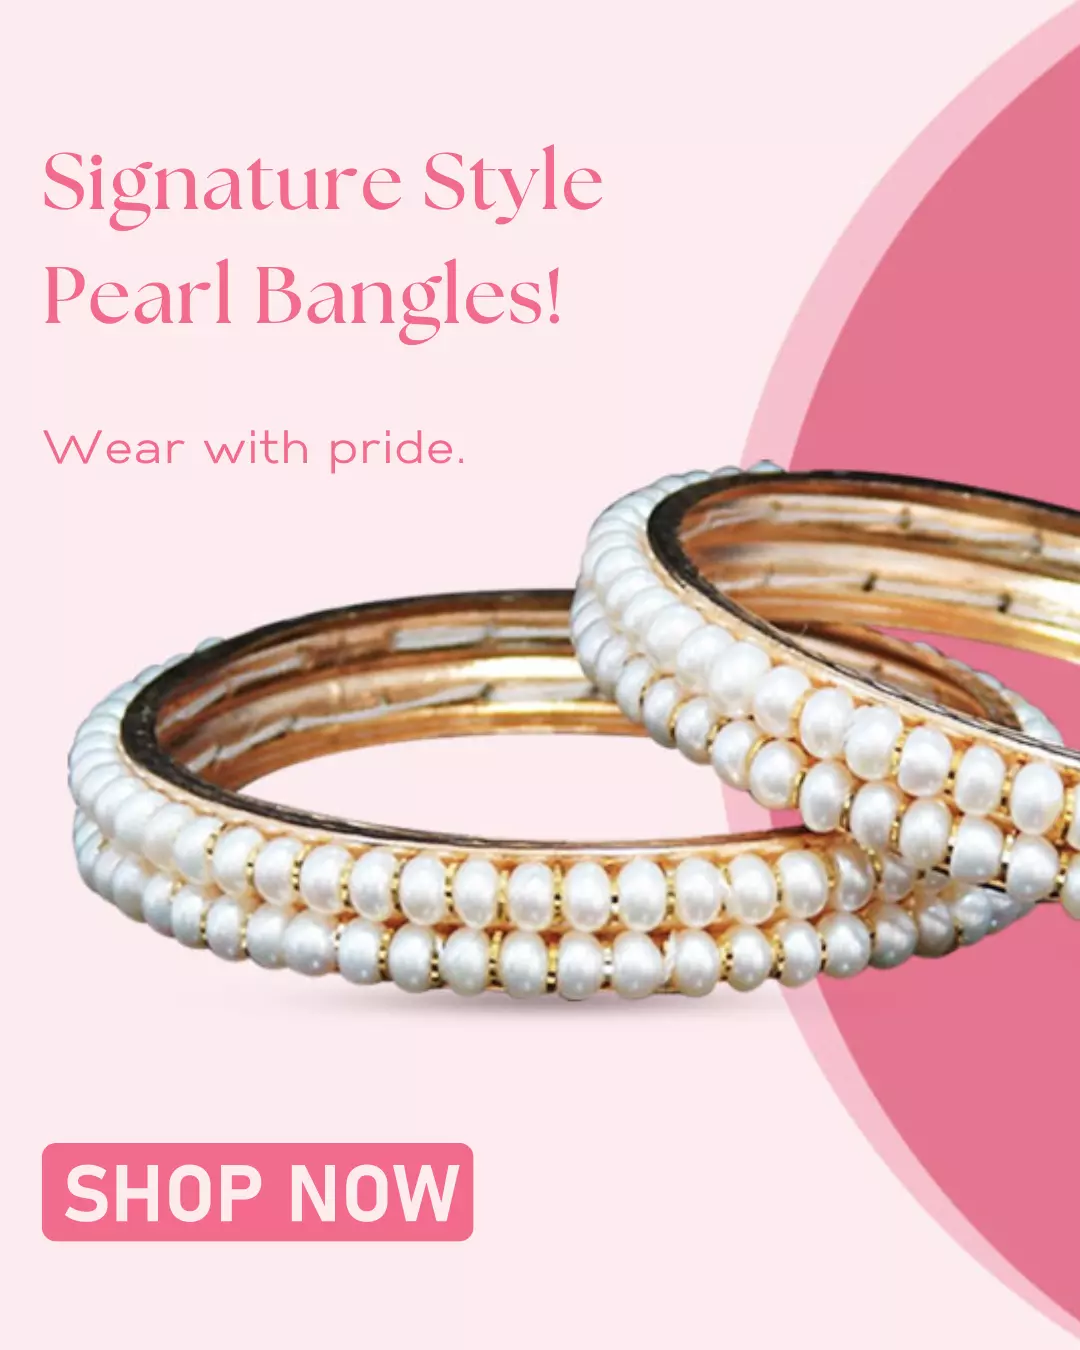 Blush Pink & Lovely White Pearls Double Knotted Bracelet - Pure Pearls